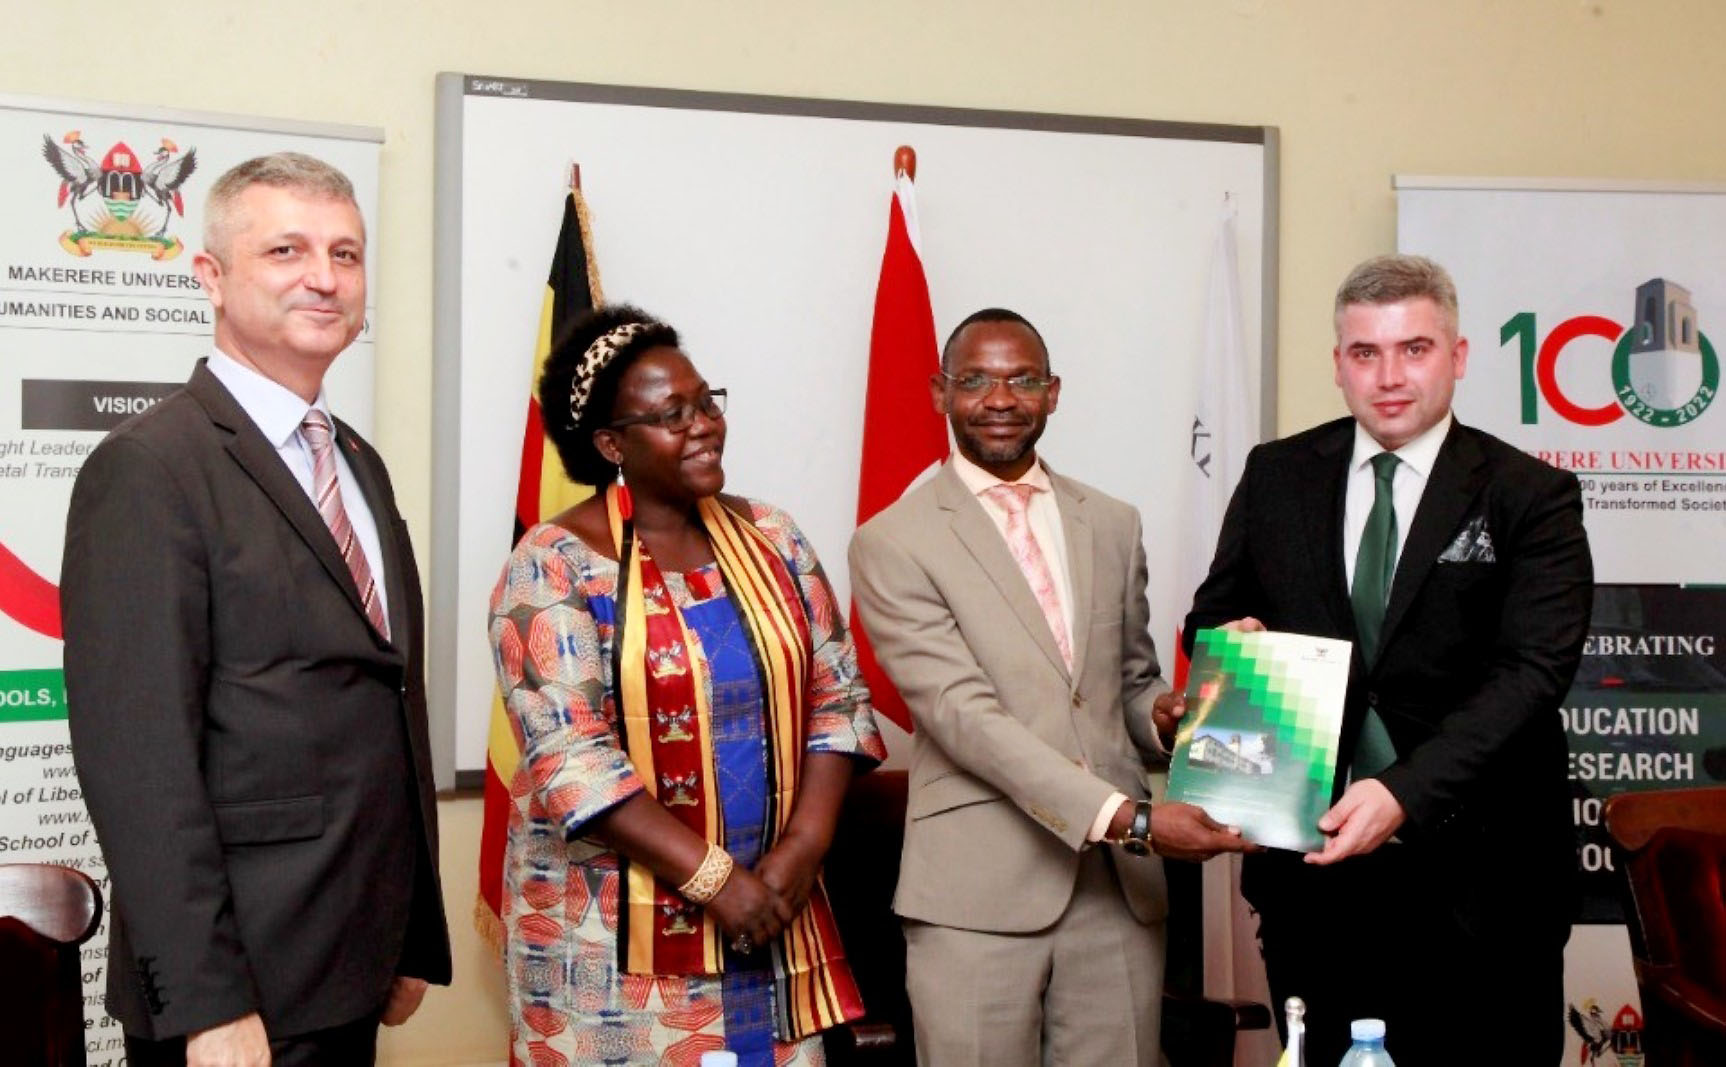 The DVCAA-Assoc. Prof. Umar Kakumba, Deputy Vice Chancellor (2nd R) and Dr. Abdullah Kutalmis Yalcin-Vice President Yunus Emre Institute (R) show of the signed MoU as Principal CHUSS-Assoc. Prof. Josephine Ahikire (2nd L) and another official witness on 25th February 2022, CTF1 Makerere University.